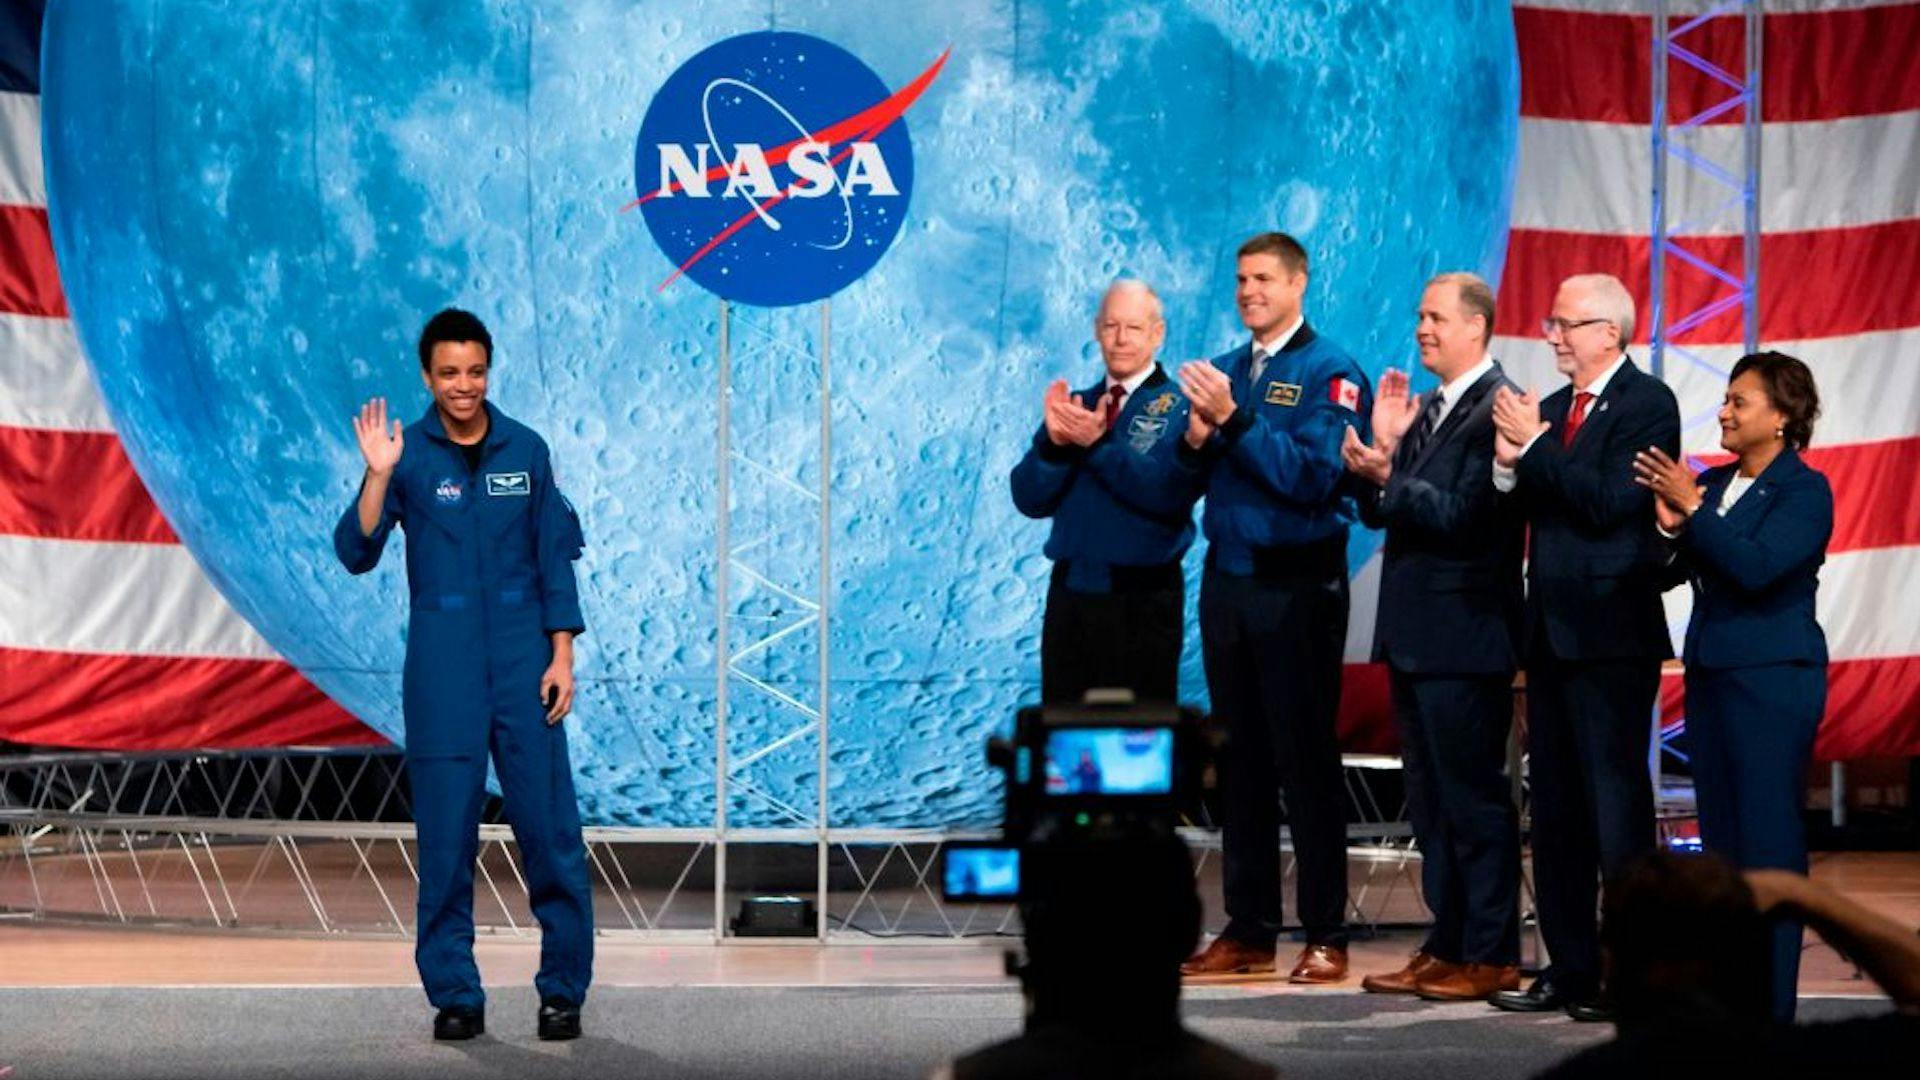 Jessica Watkins at the astronaut graduation ceremony at Johnson Space Center in Houston on January 10, 2020. | Image: Getty Images